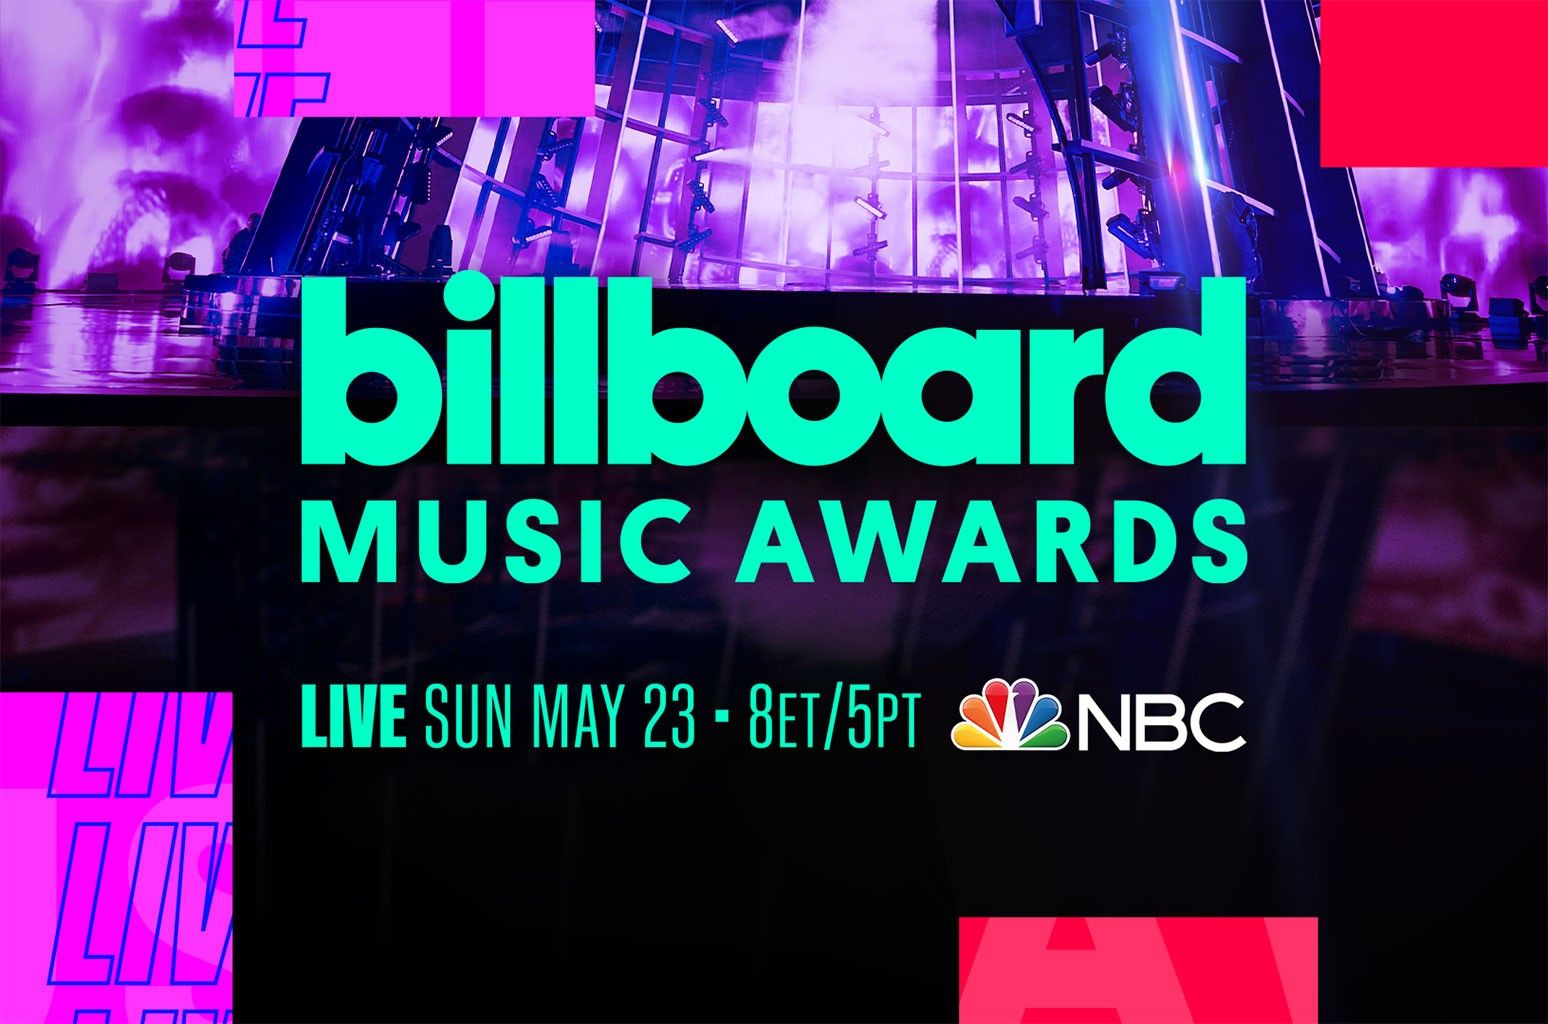 Billboard Music Award live stream: Start time and where to watch